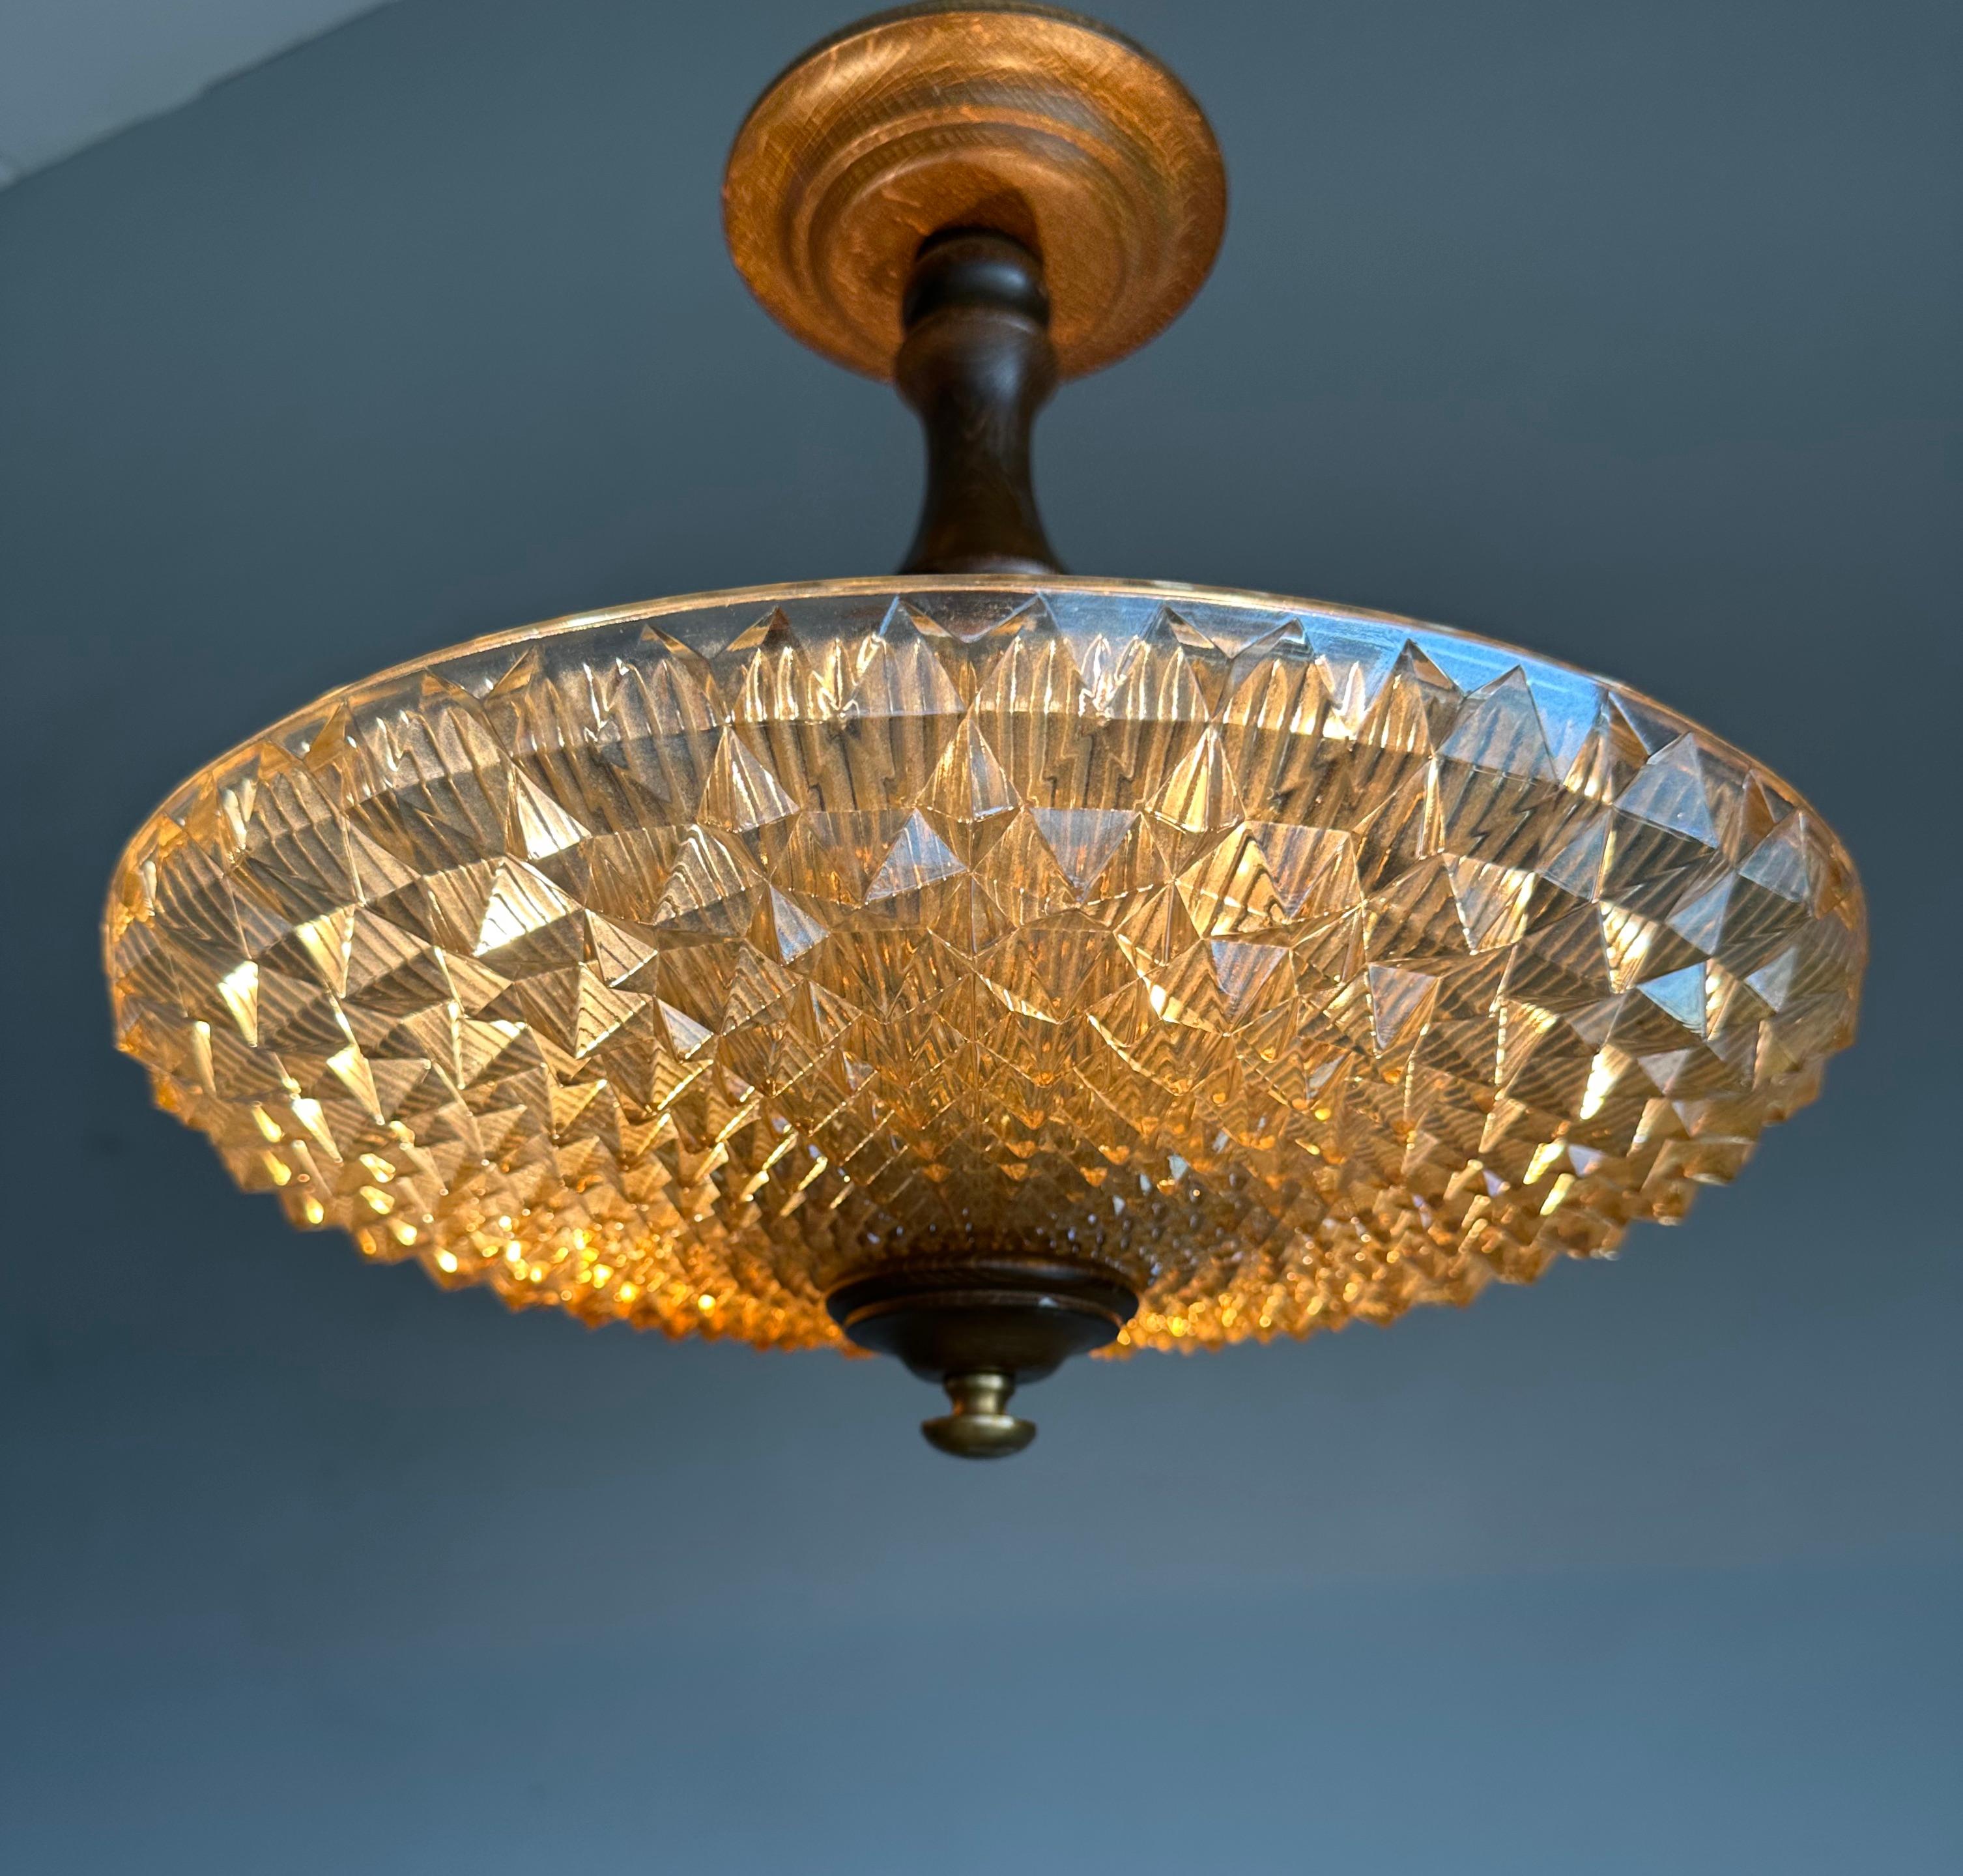 Stunning Art Deco style 3-light fixture / flushmount

In our view this rare and amazing design pendant is one of the few French designs that comes very close to the geometry of American Art Deco designs from the 1920s and 1930s. The combination of